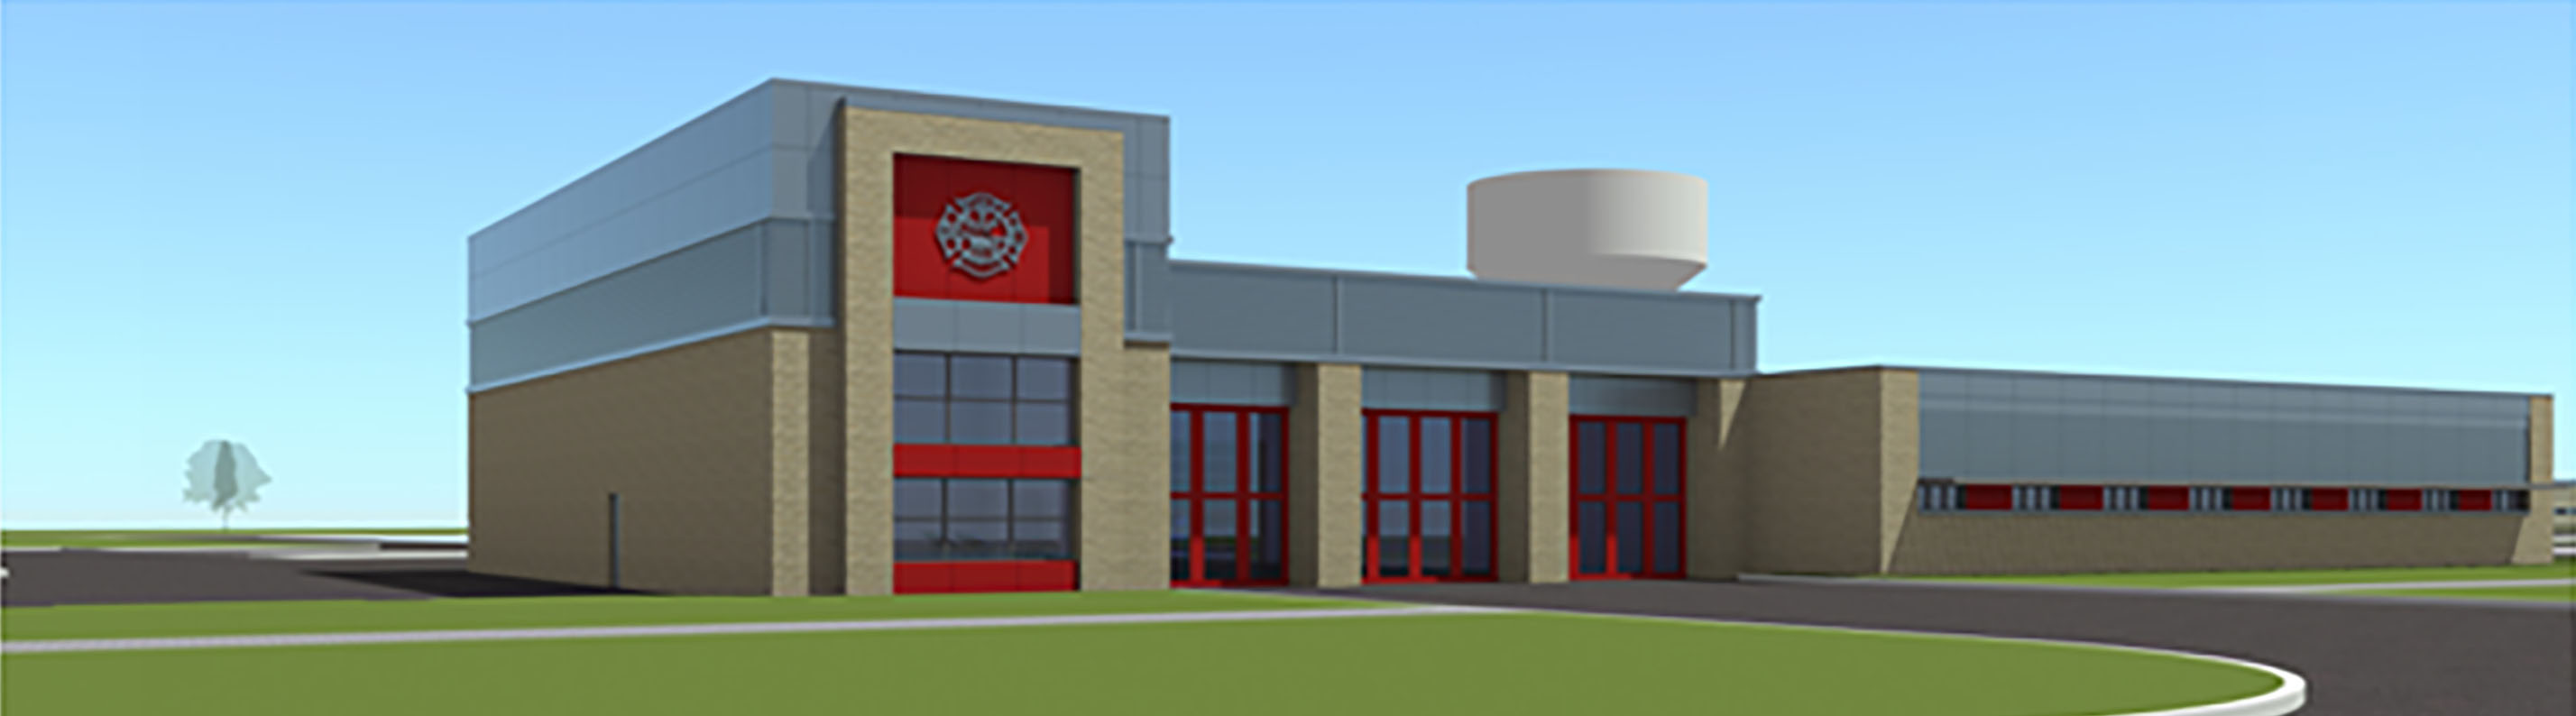 fire station image from left